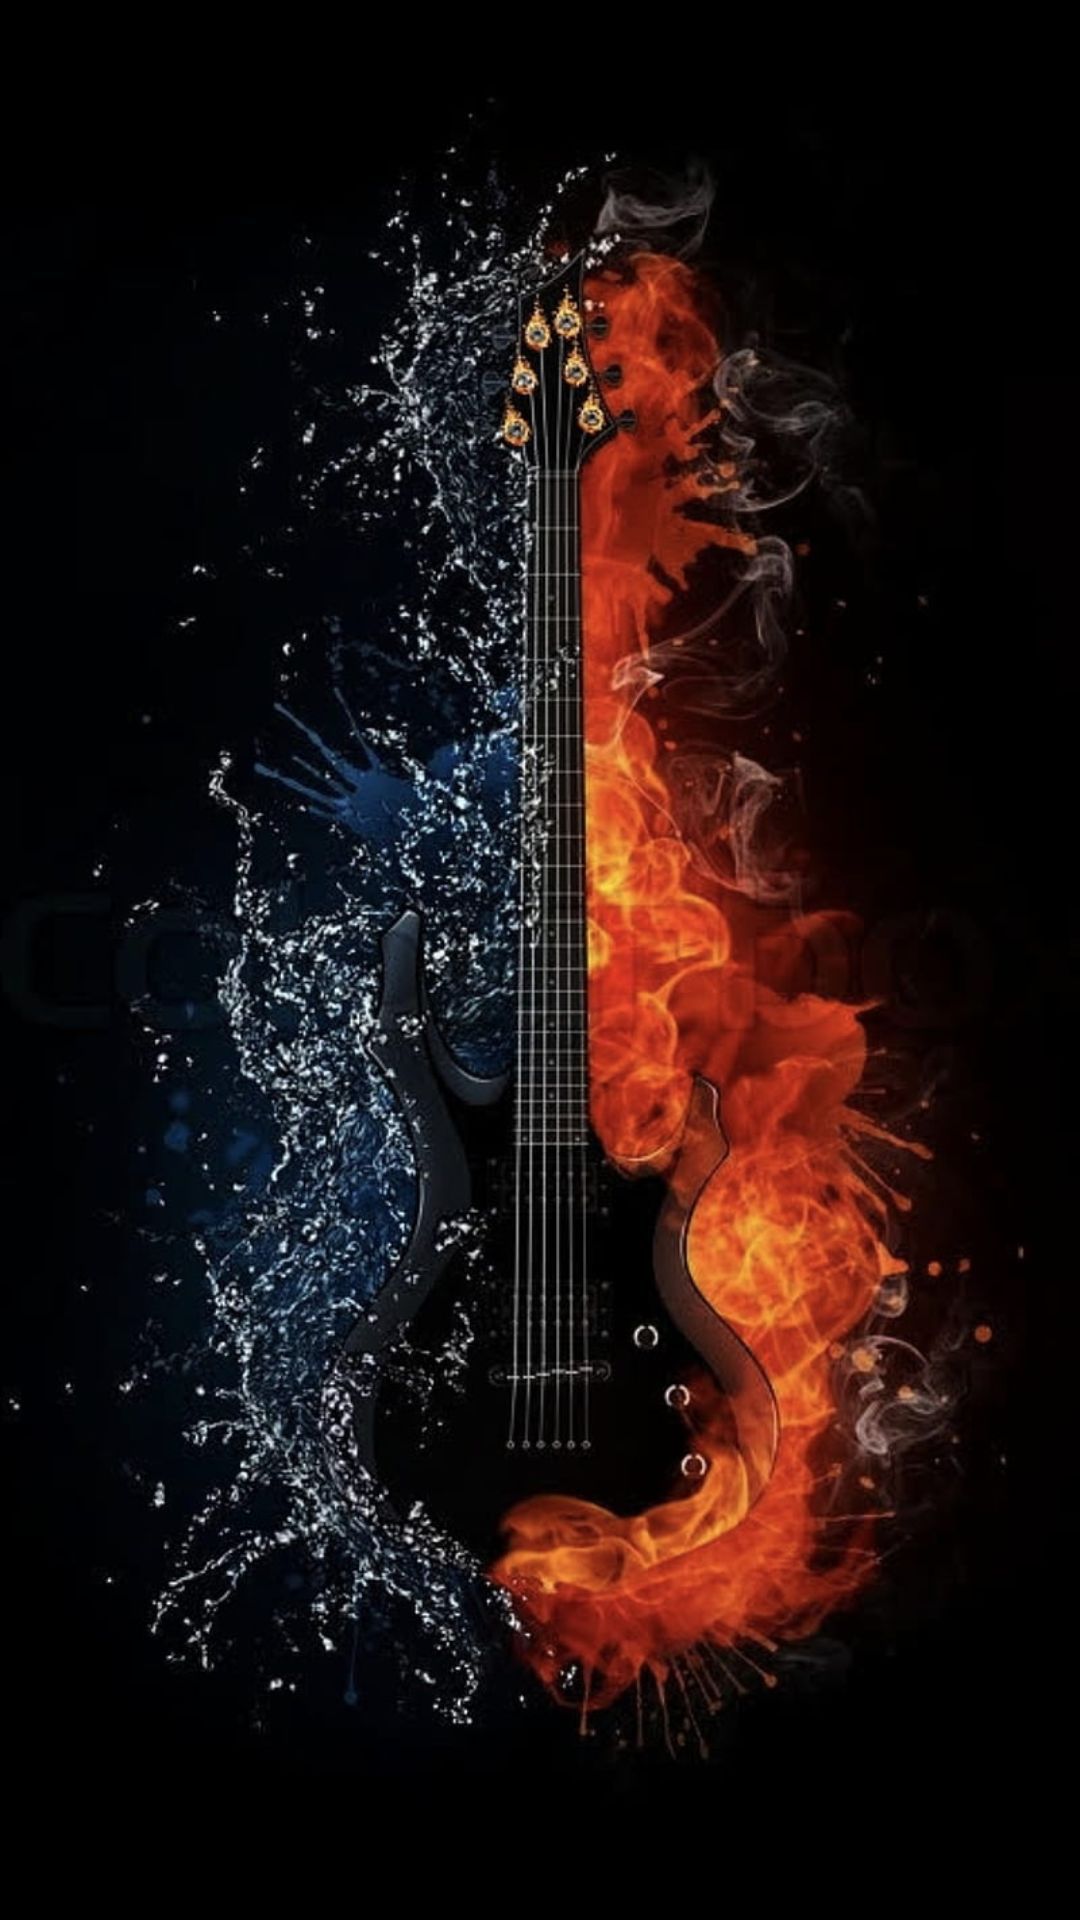 A guitar with flames and water in the background - Guitar